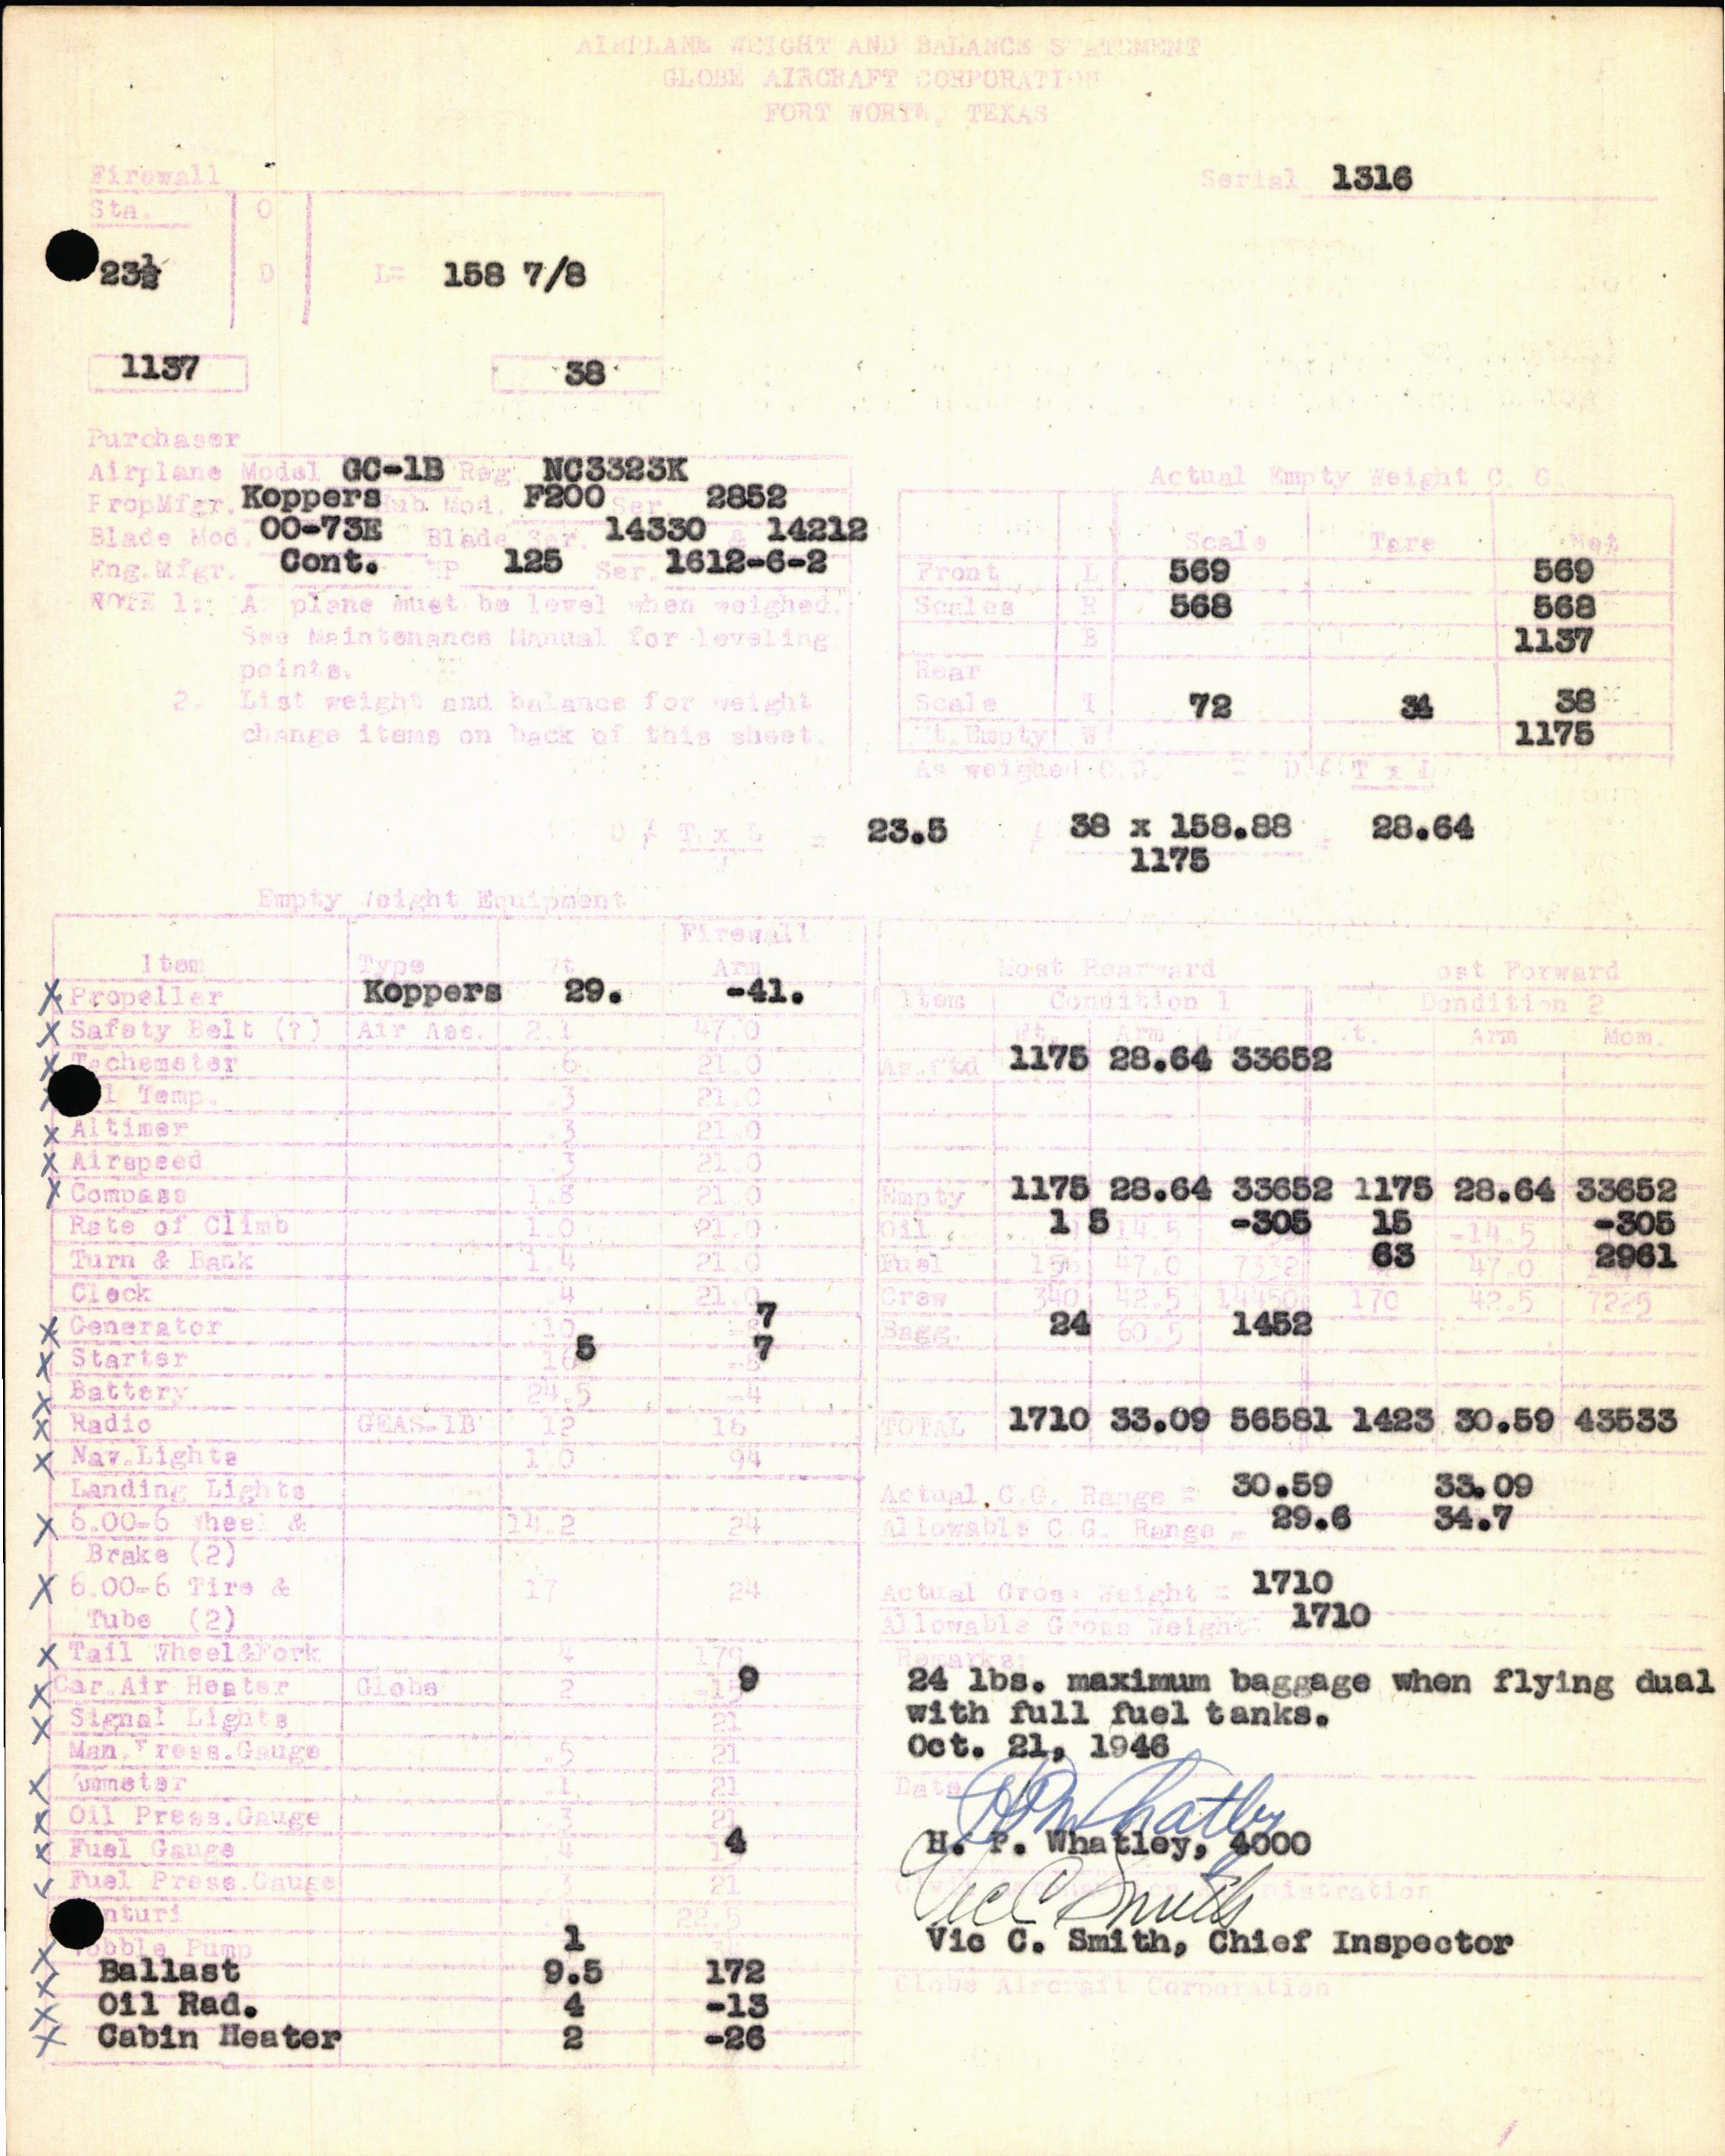 Sample page 7 from AirCorps Library document: Technical Information for Serial Number 1316